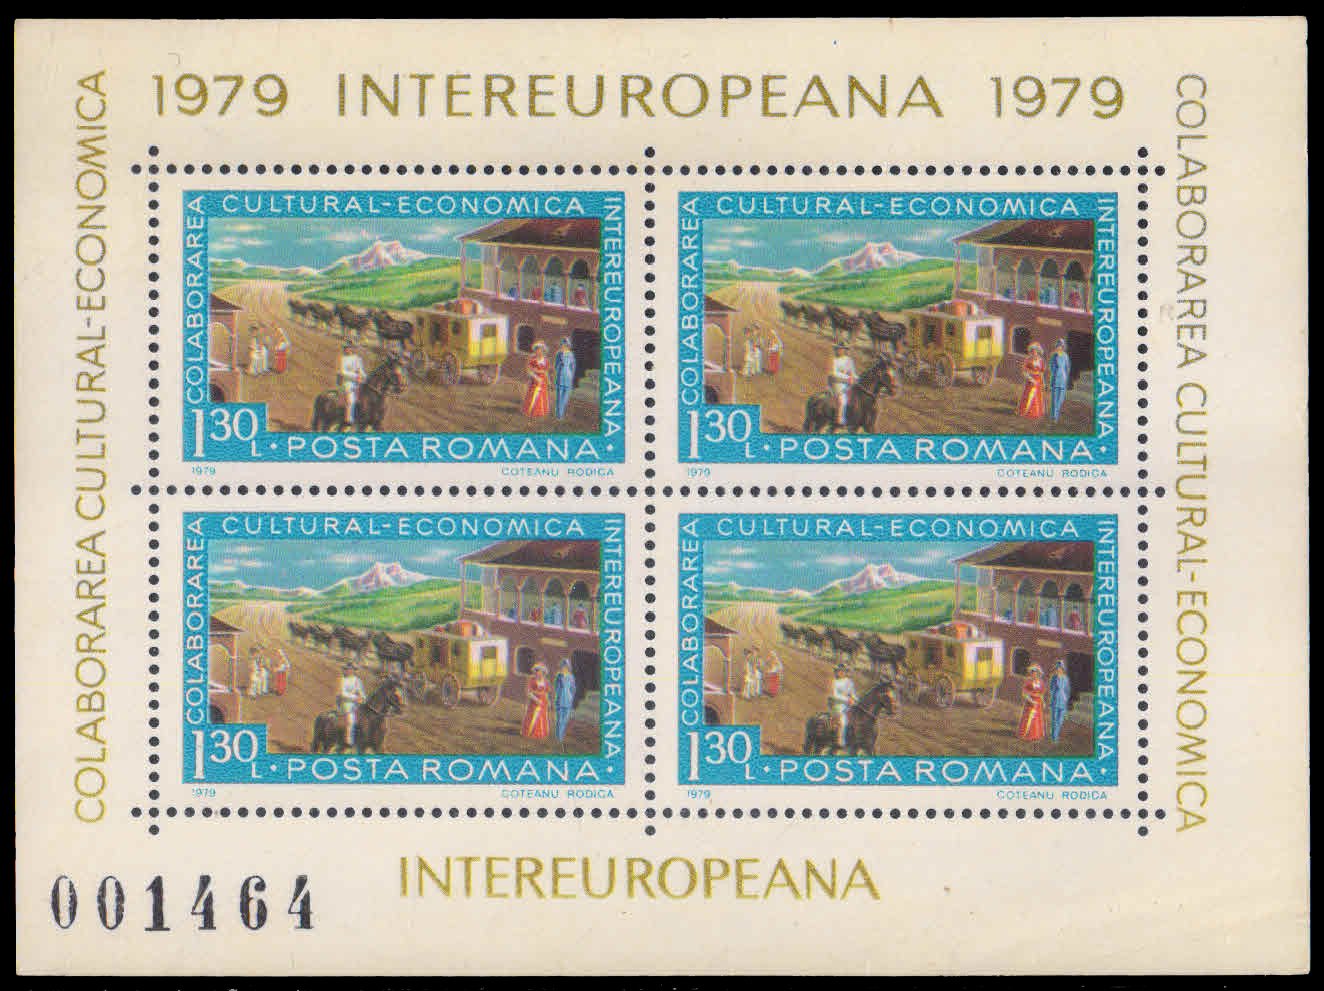 ROMANIA 1979-Street with Mail Coach & Post Rider, Inter-European Cultural & Economic Co-operation, Block of 4, MNH, S.G. 4450